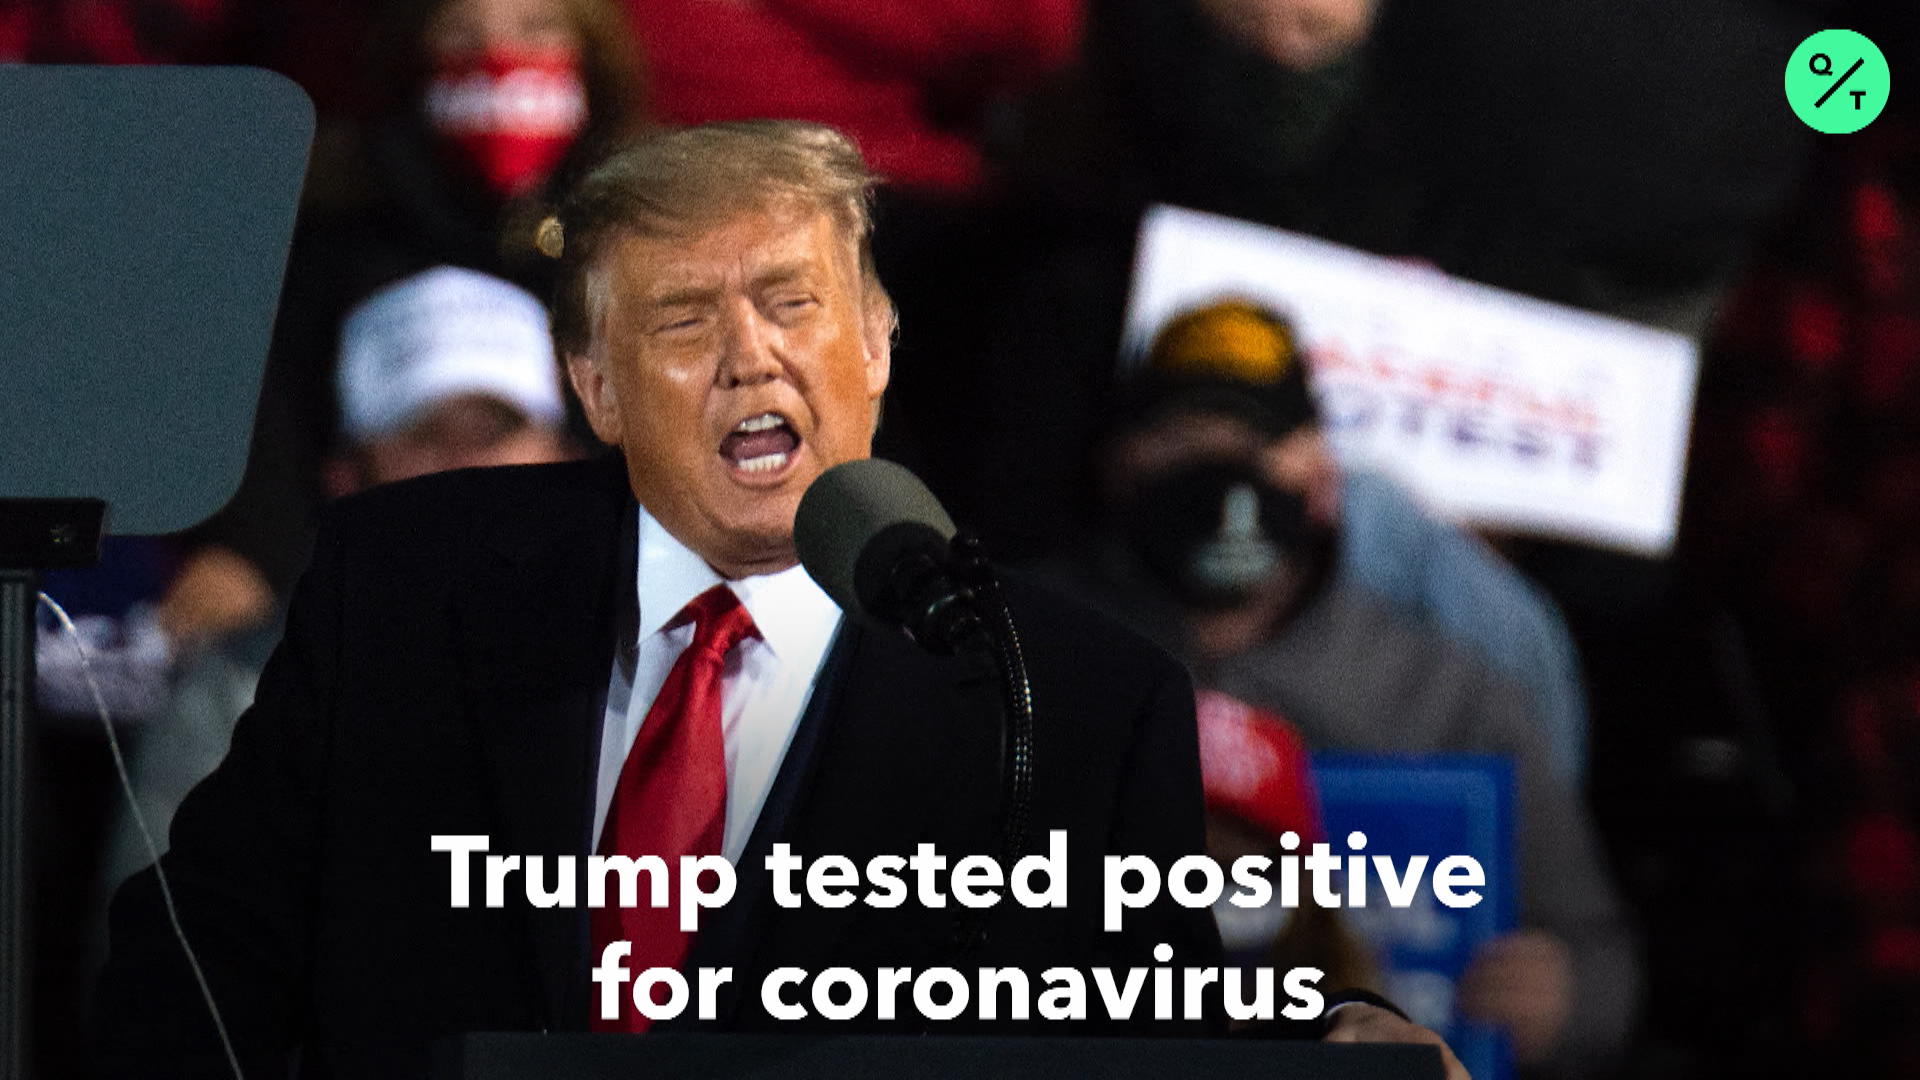 Trump Gets COVID-19—And Sets Twitter Ablaze wth Memes